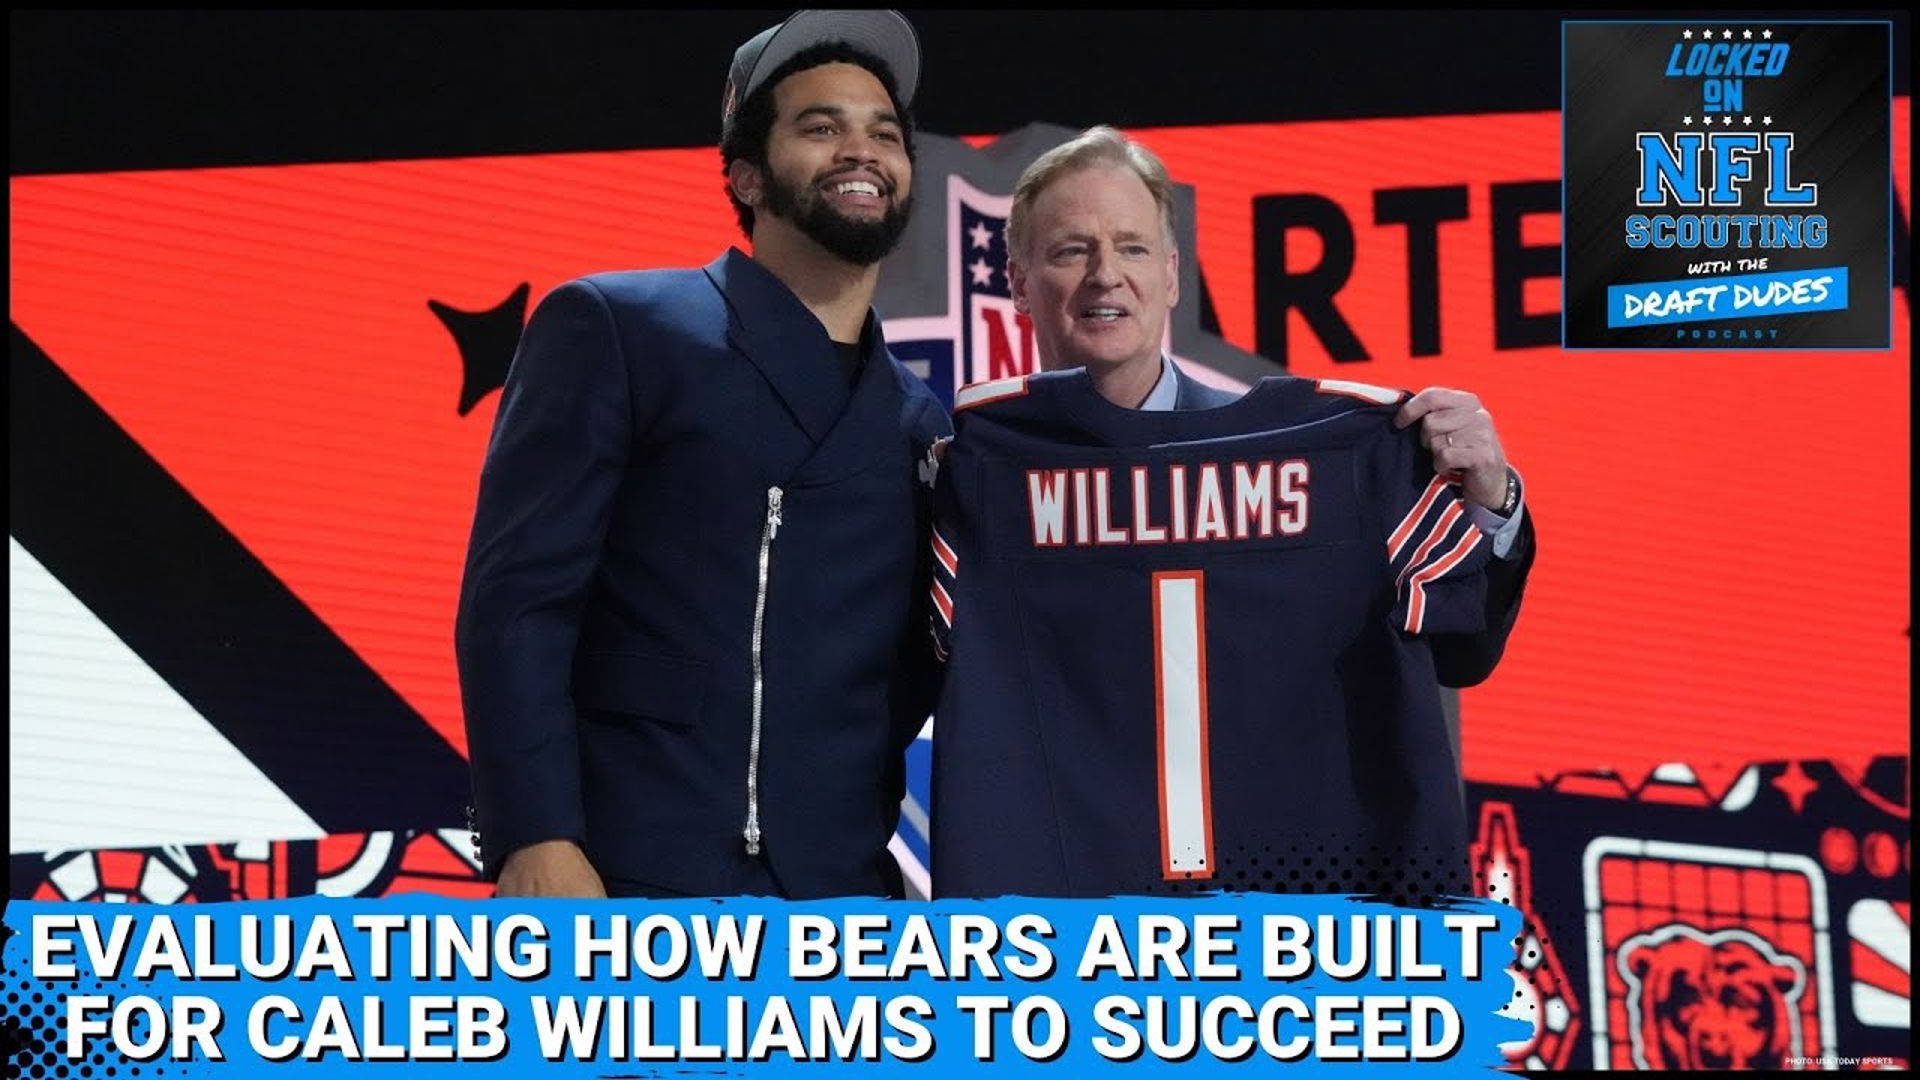 So how are the Chicago Bears built around Caleb Williams to foster an environment conducive for success? Determining that is  the task of the Draft Dudes.